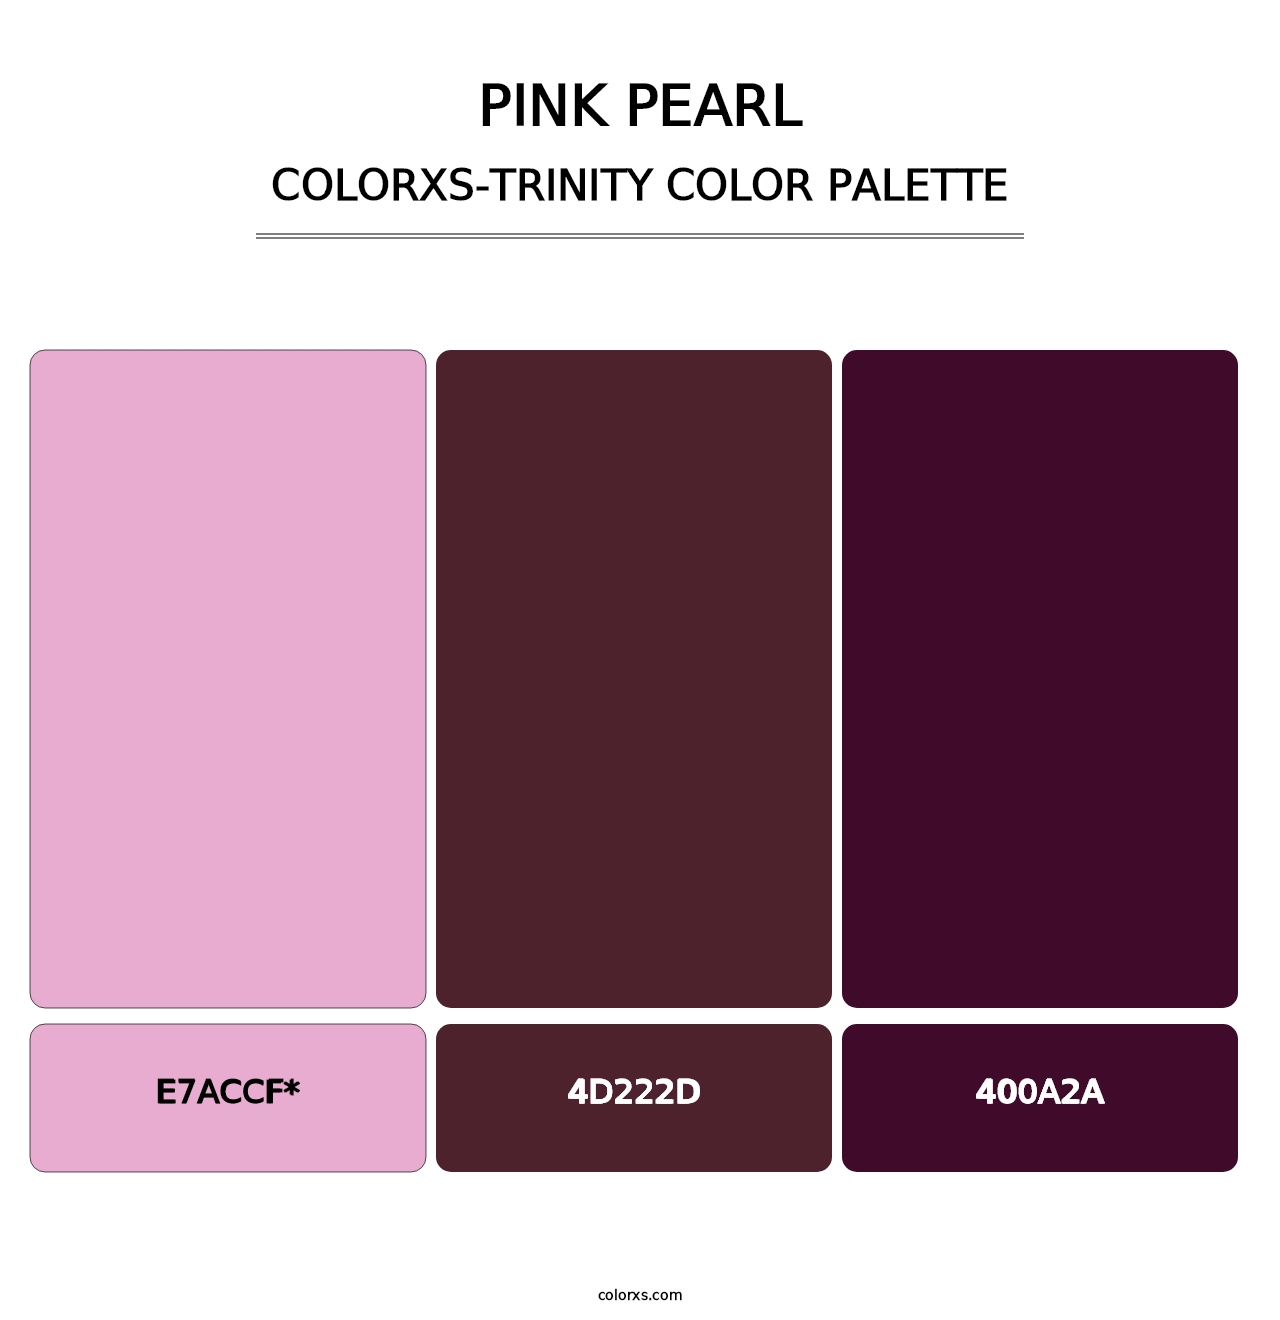 Pink Pearl - Colorxs Trinity Palette